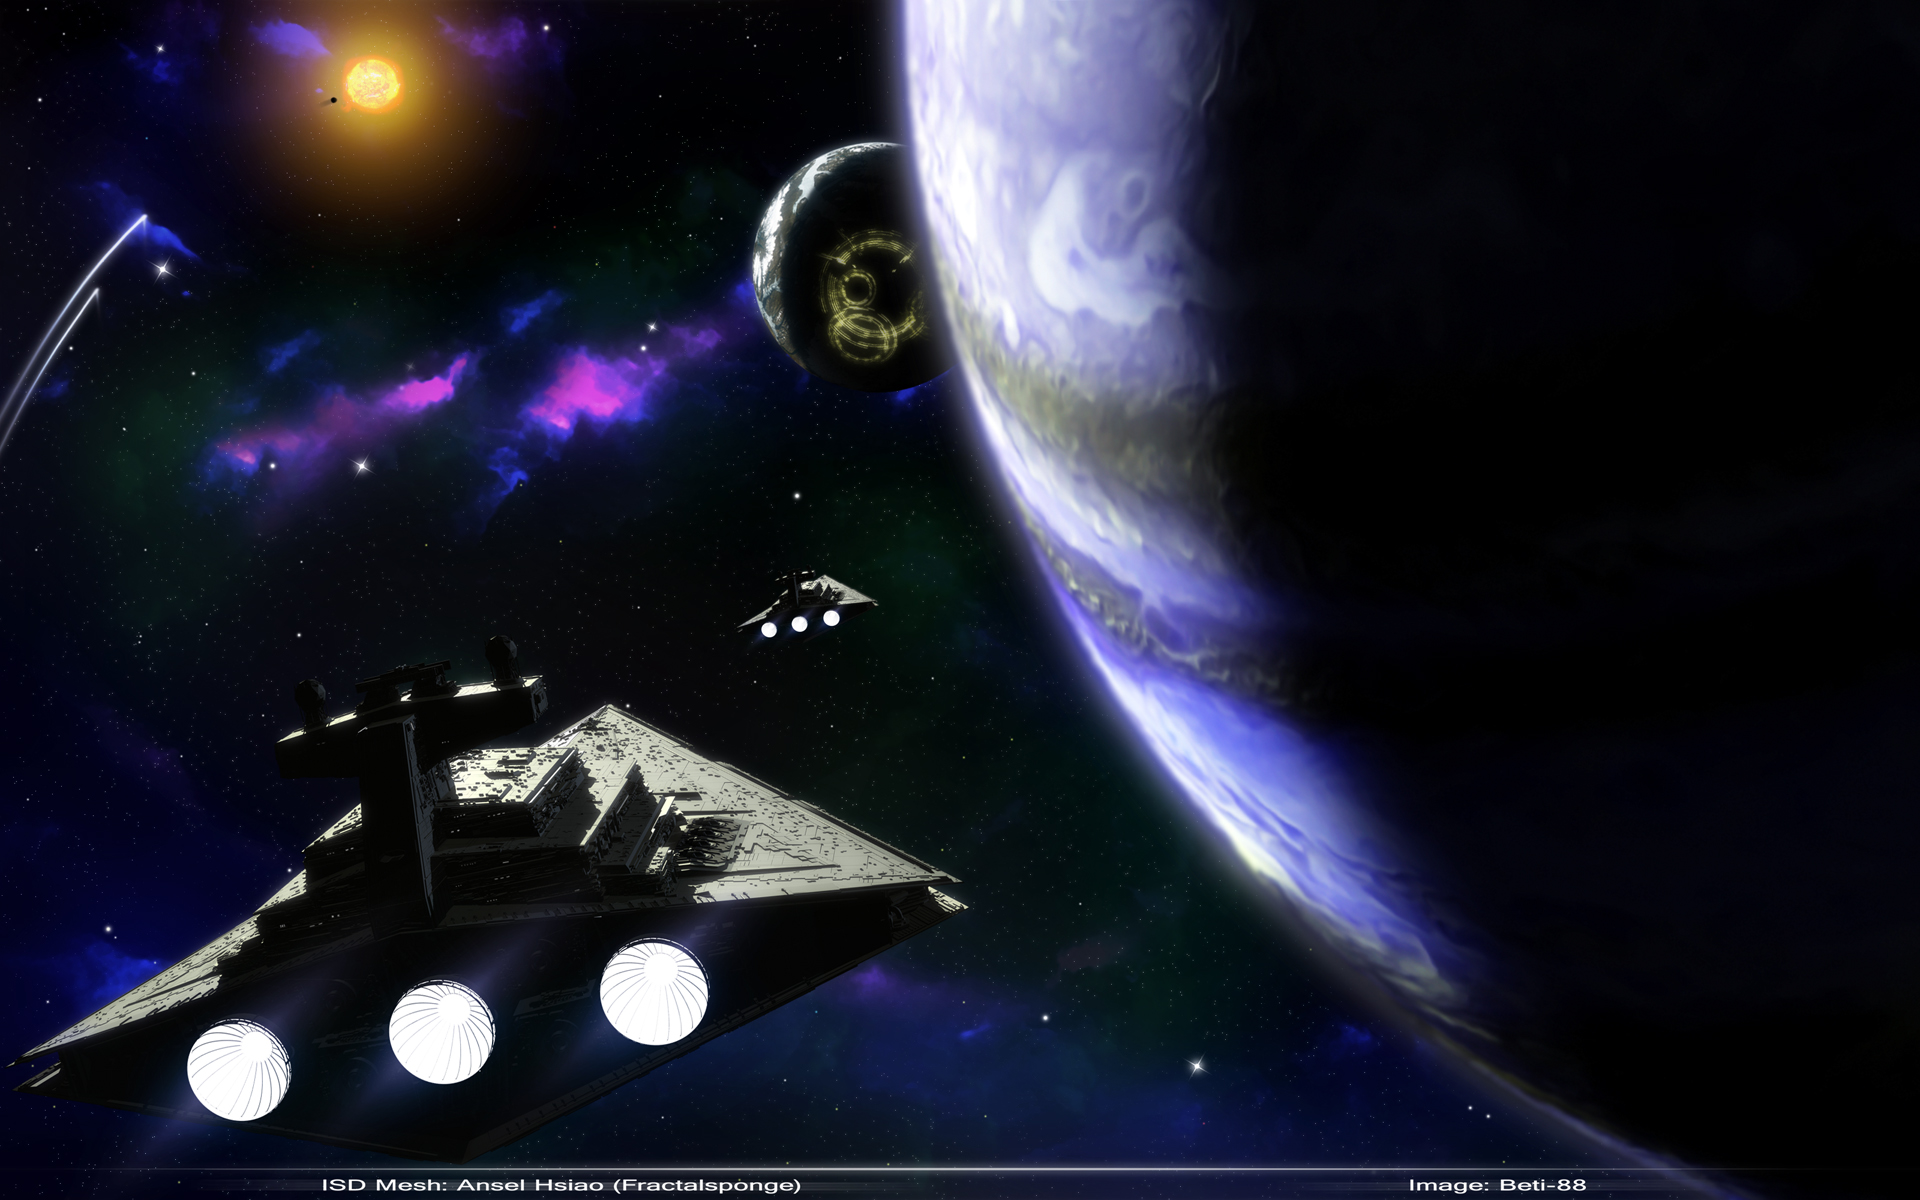 outer space, planets, spaceships, vehicles - desktop wallpaper